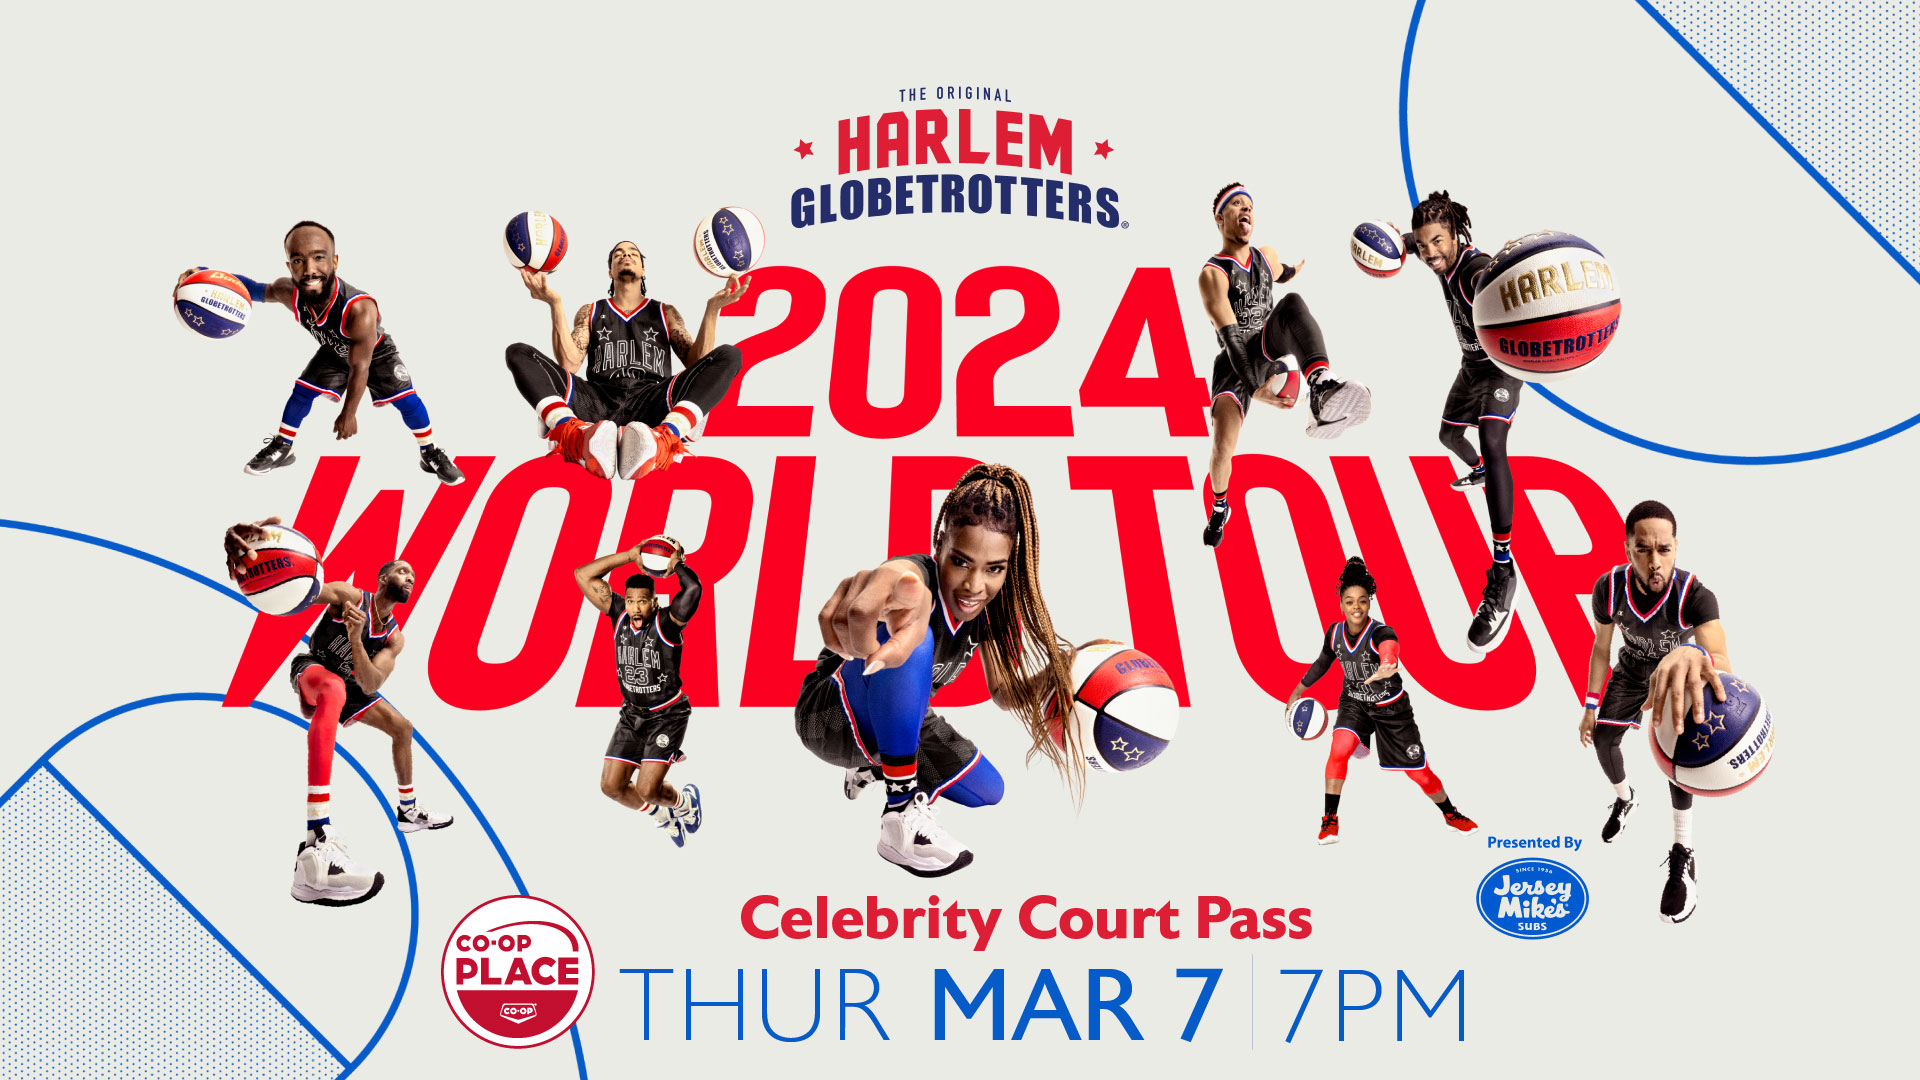 The Harlem Globetrotters Celebrity Court Pass